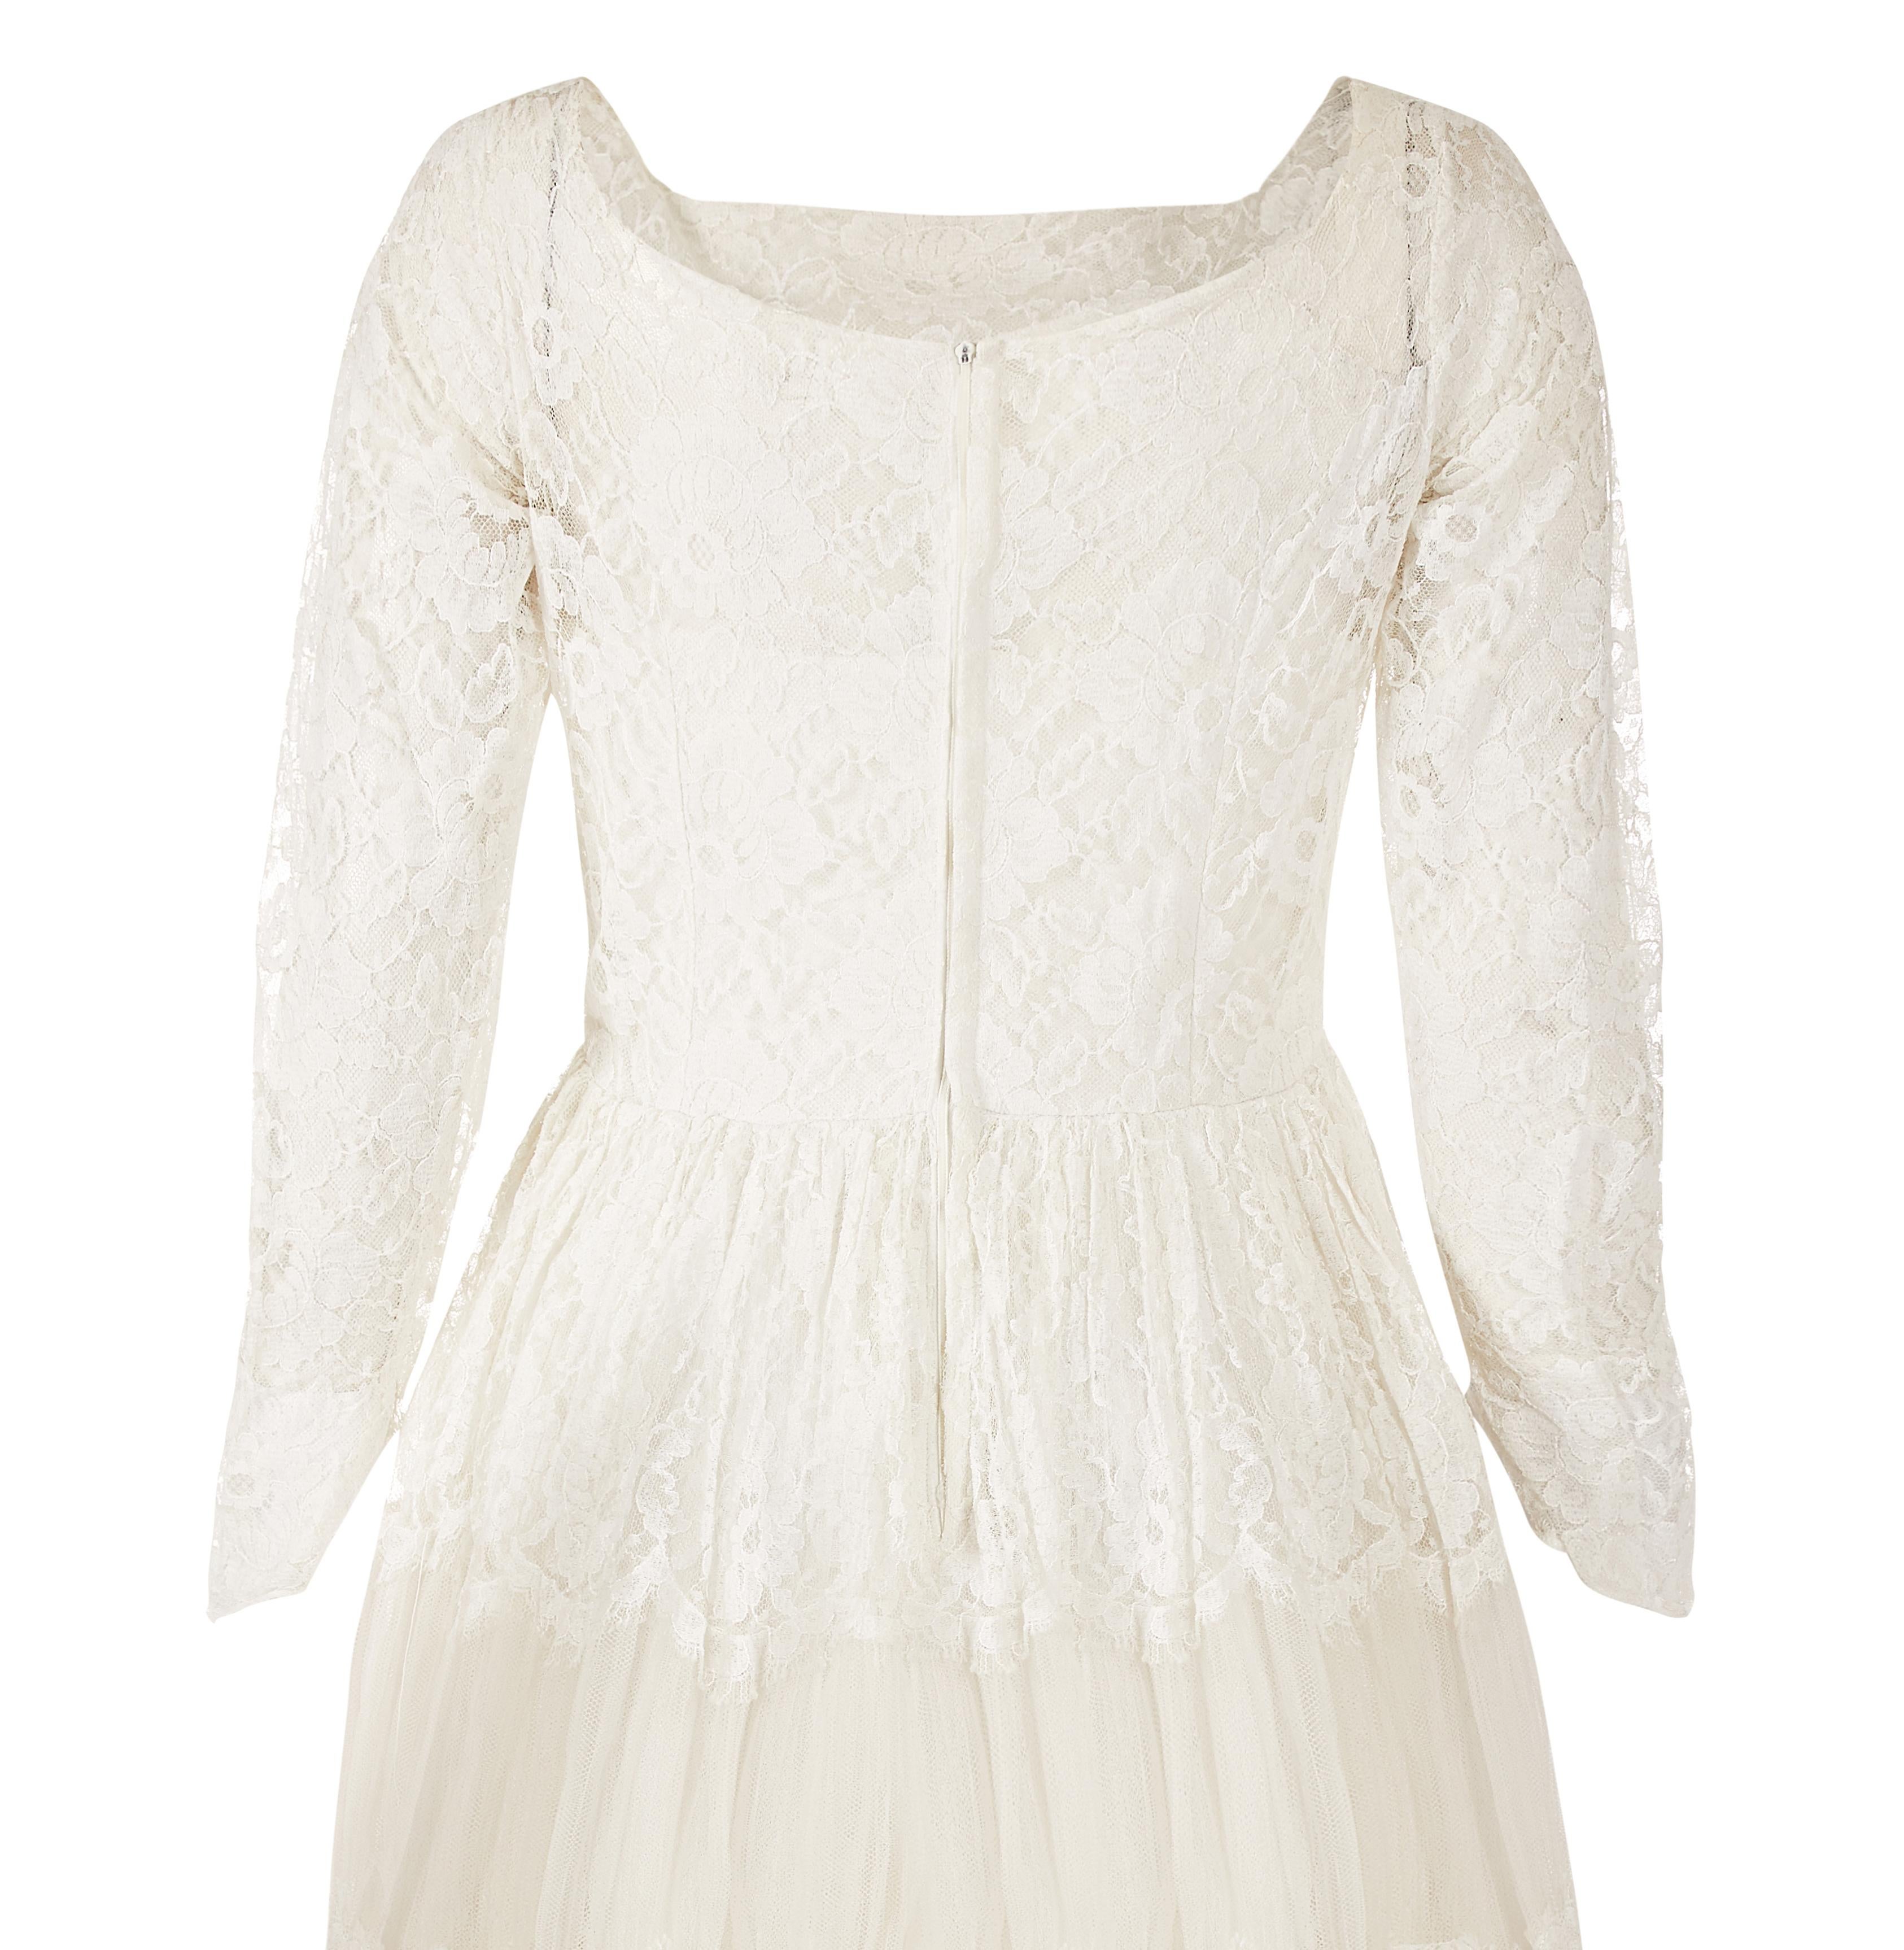 Late 1950s Early 1960s White Chantilly Style Lace Tiered Bridal Gown ...